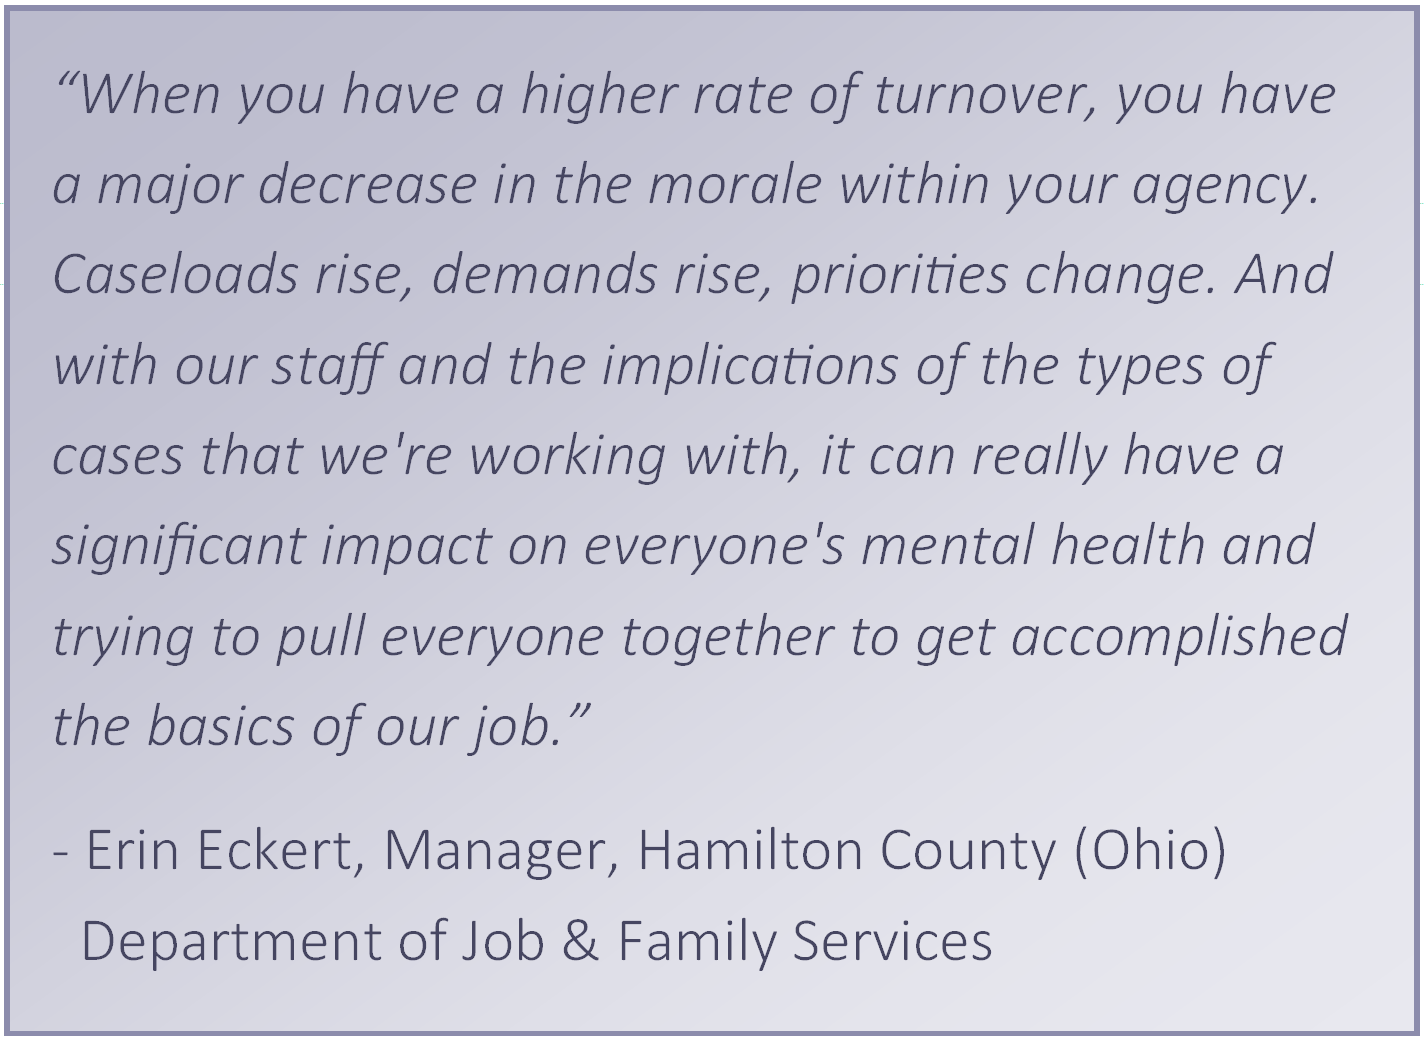 “When you have a higher rate of turnover, you have a major decrease in the morale within your agency. Caseloads rise, demands rise, priorities change. And with our staff and the implications of the types of cases that we're working with, it can really hav